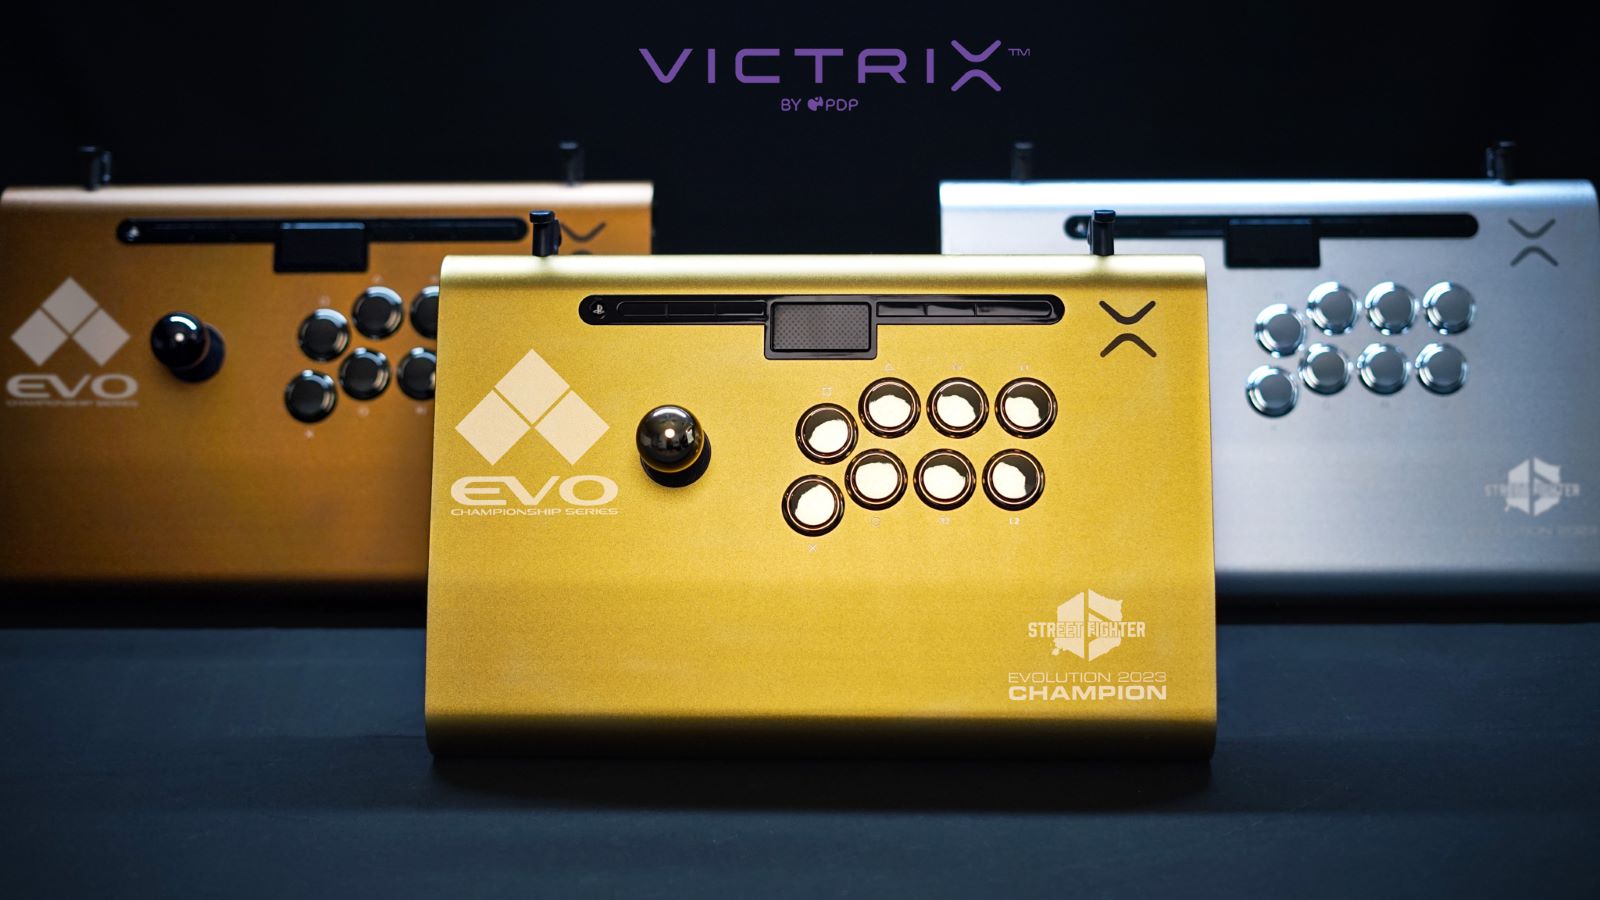 Victrix and EVO partner up to provide Exclusive Victrix Pro FS